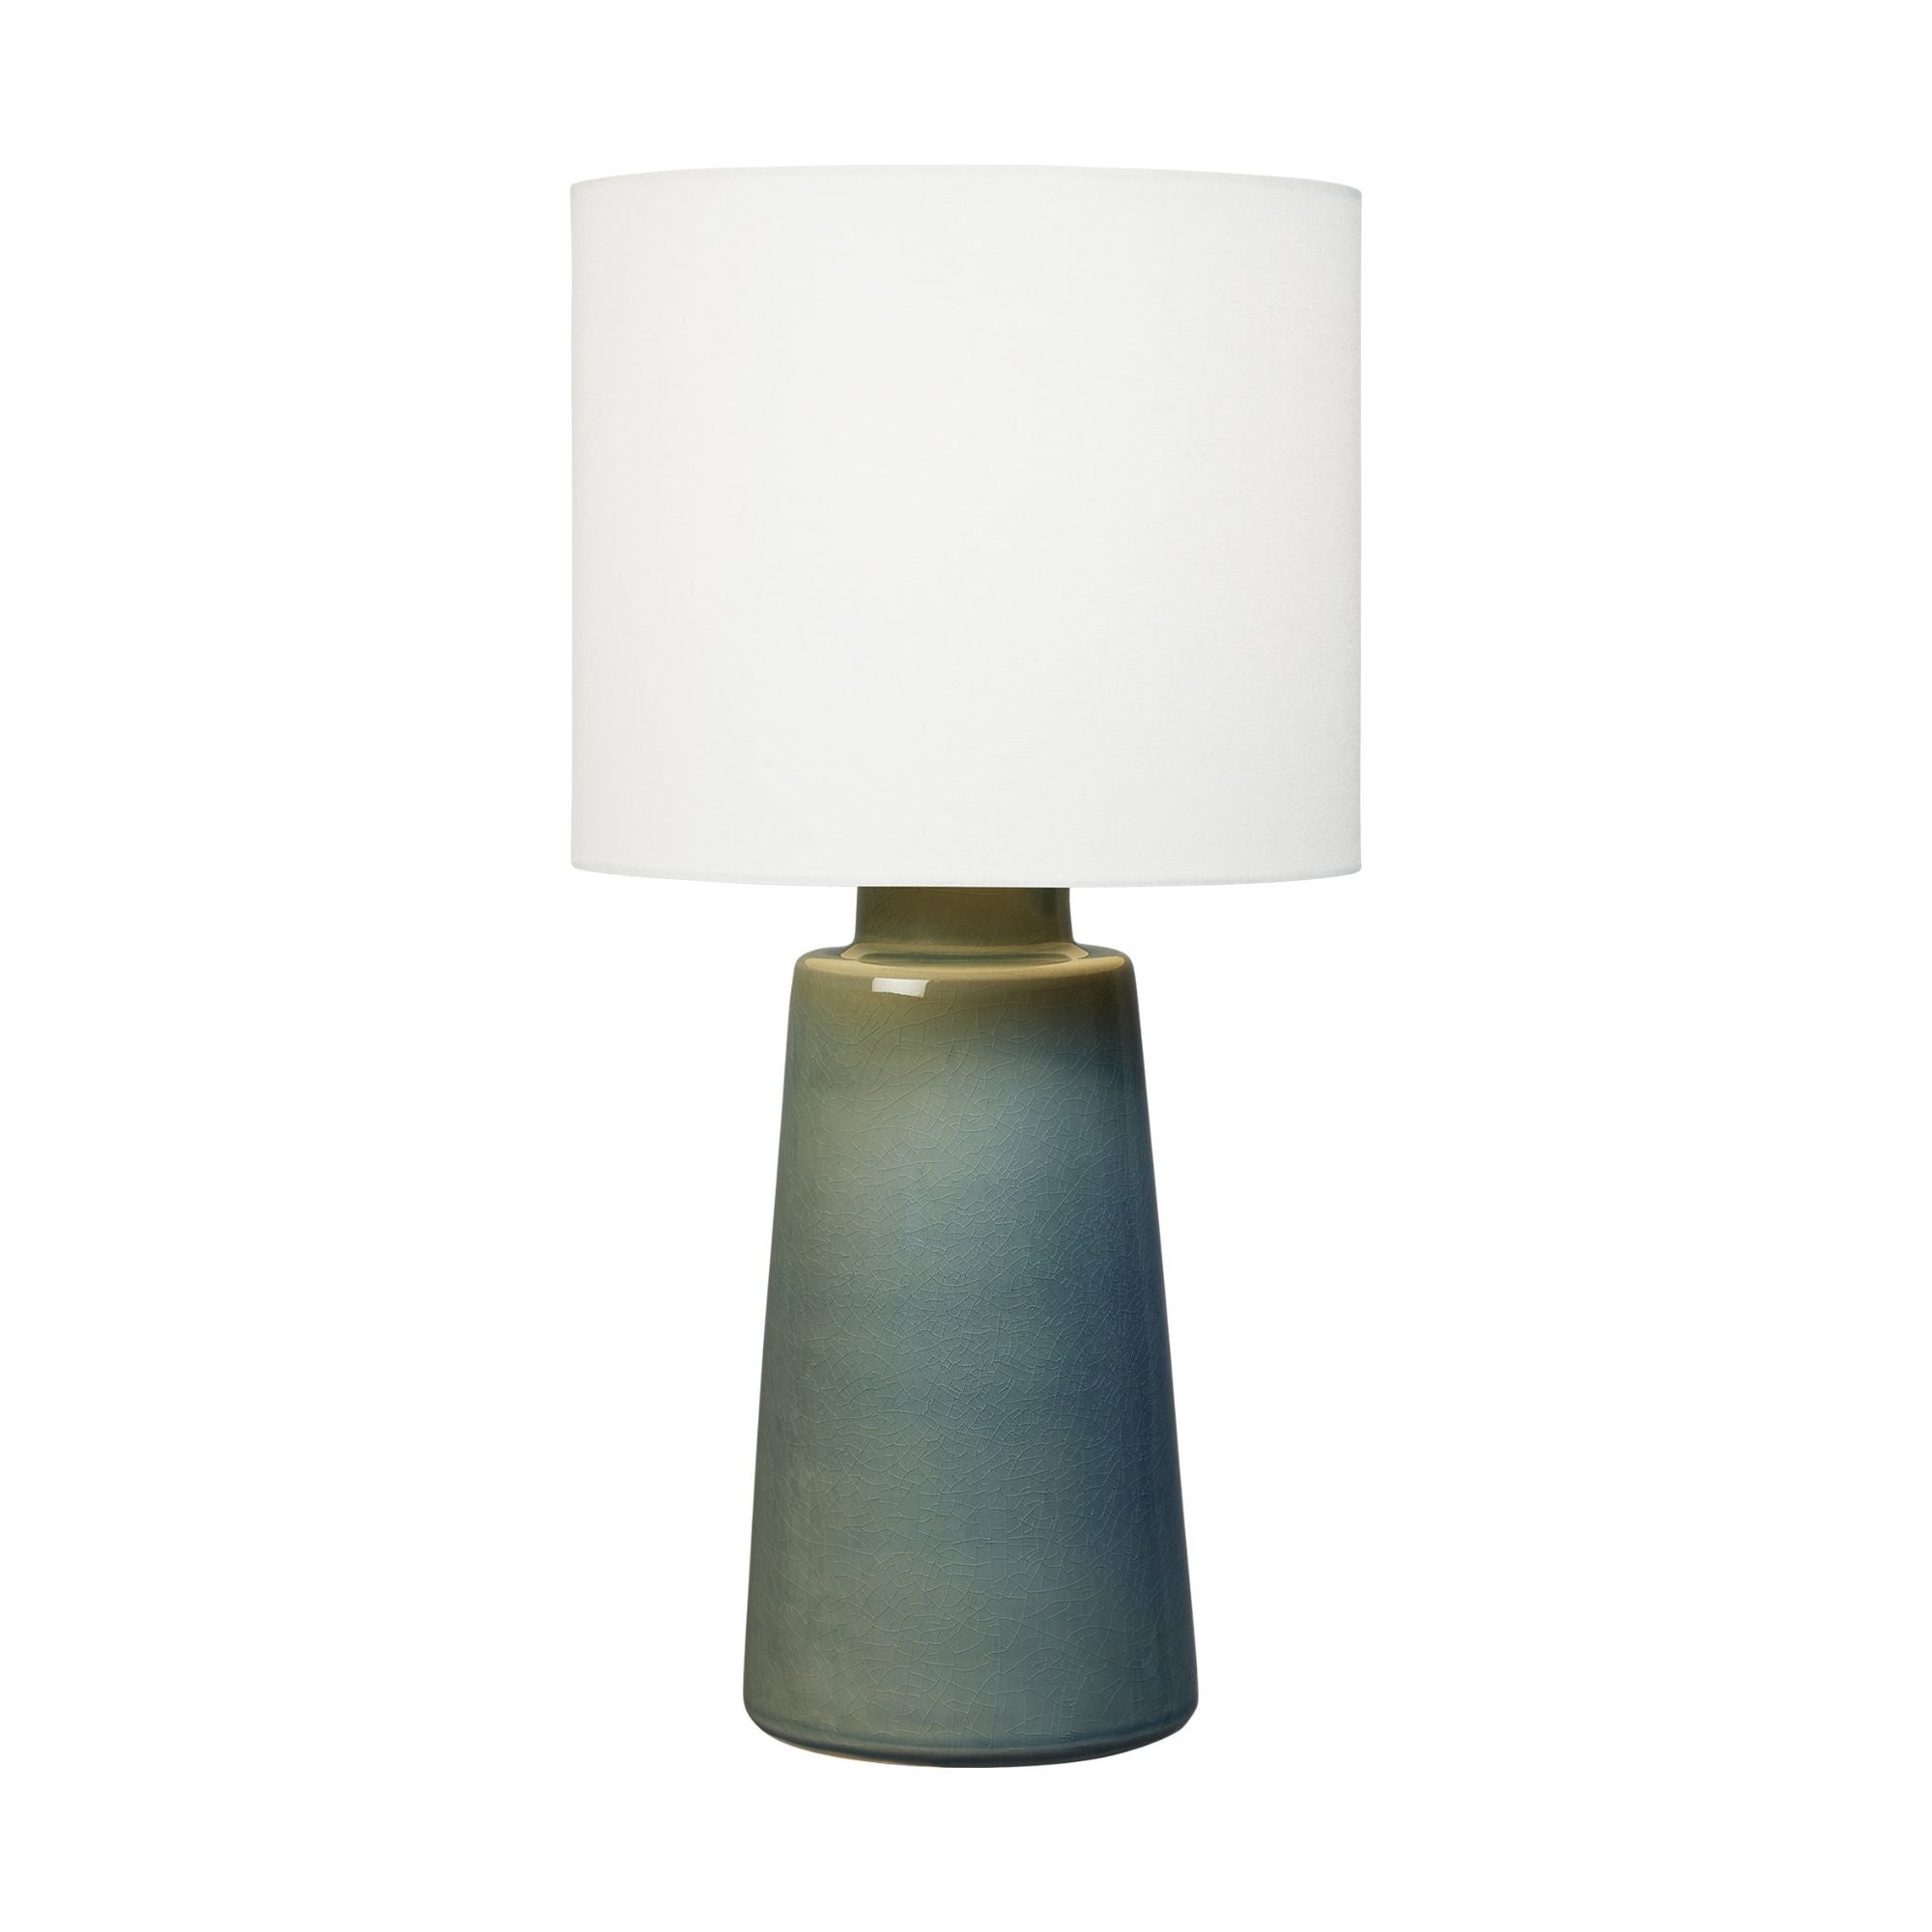 Barbara Barry Vessel Large Table Lamp in Blue Anglia Crackle